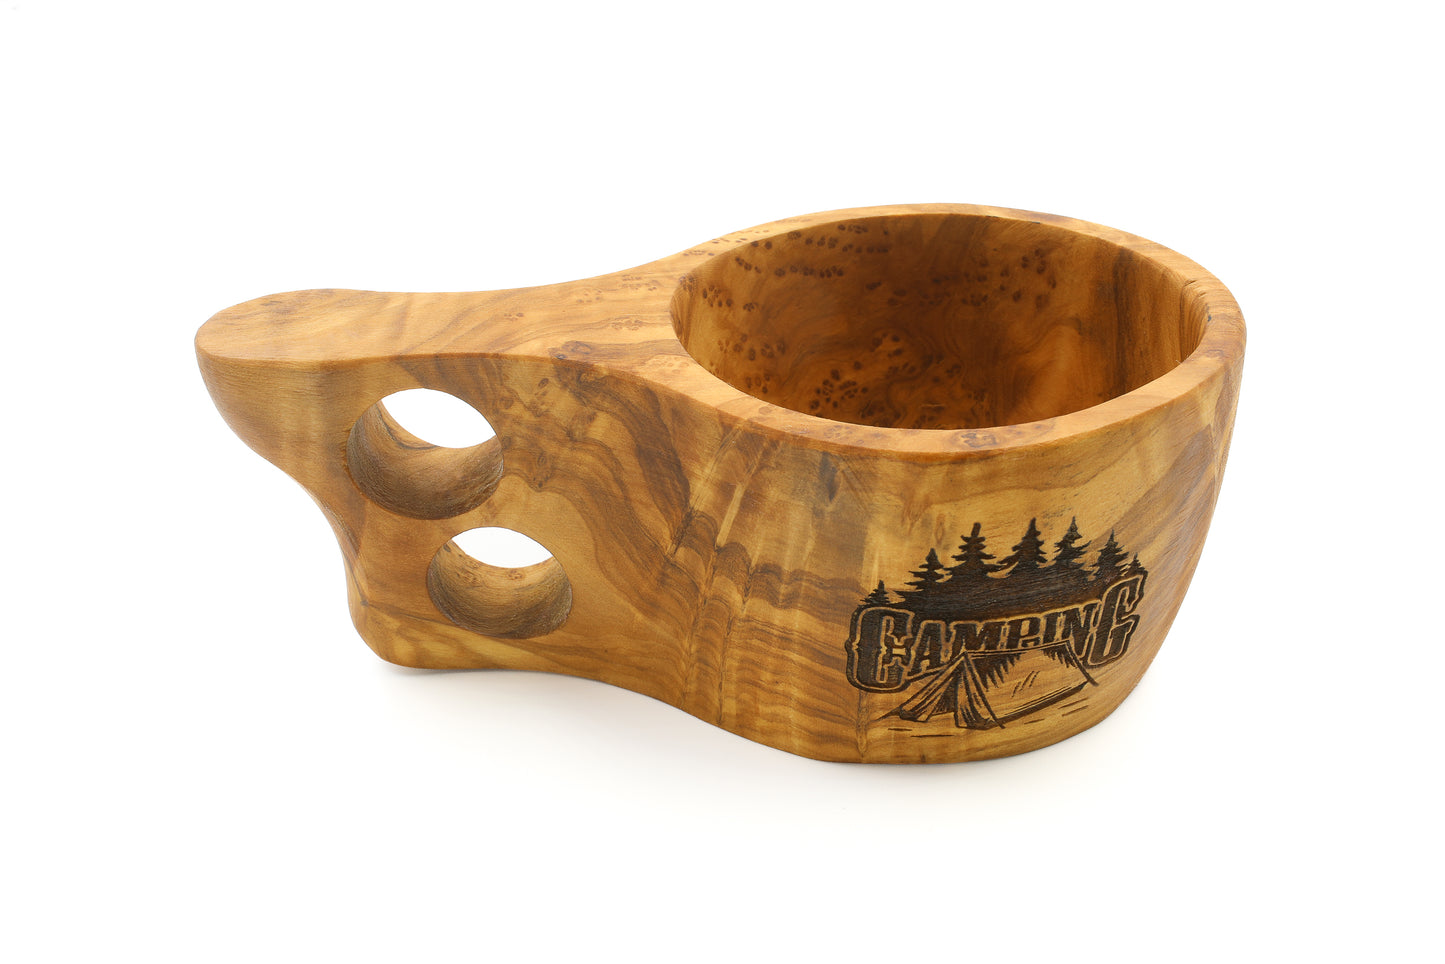 Artisan-made Scandinavian-style wooden cup from olive wood